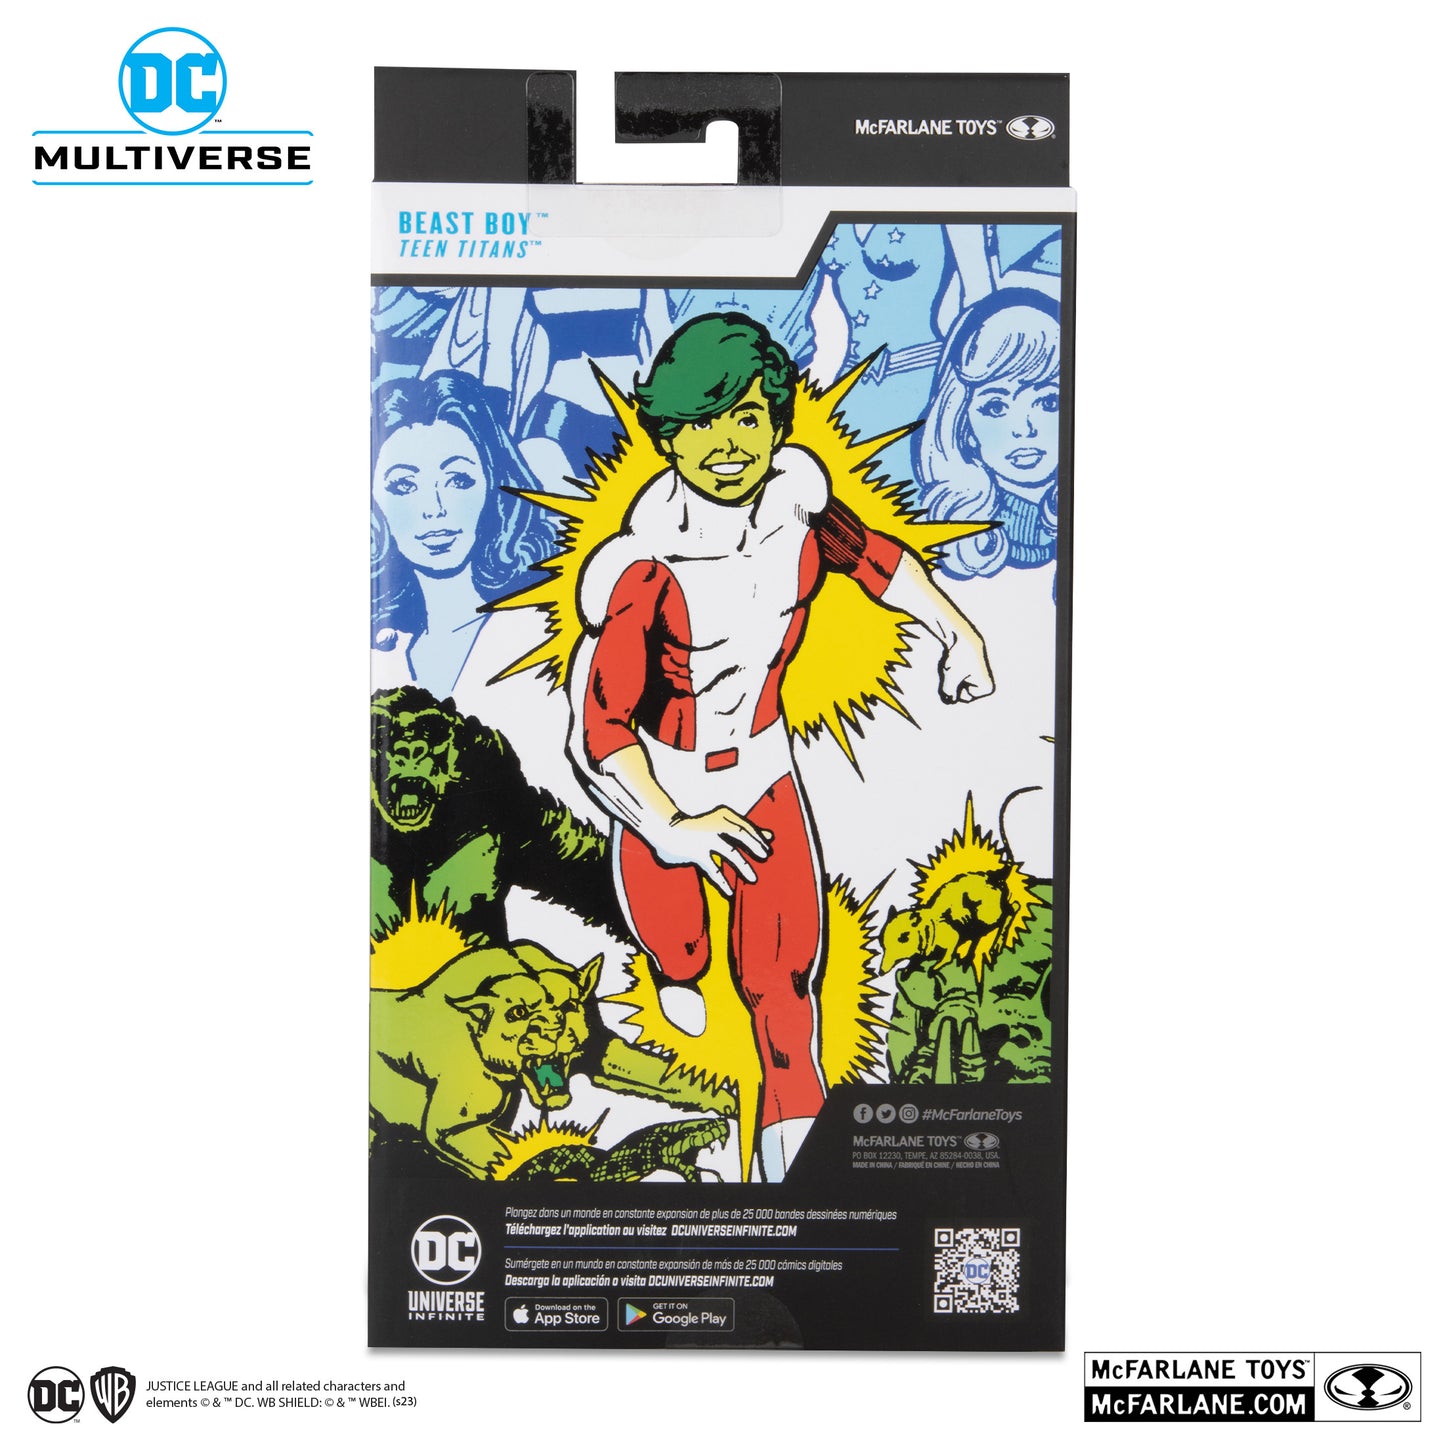 BEAST BOY (TEEN TITANS) (GOLD LABEL) ACTION FIGURE TOY  back view box - Heretoserveyou